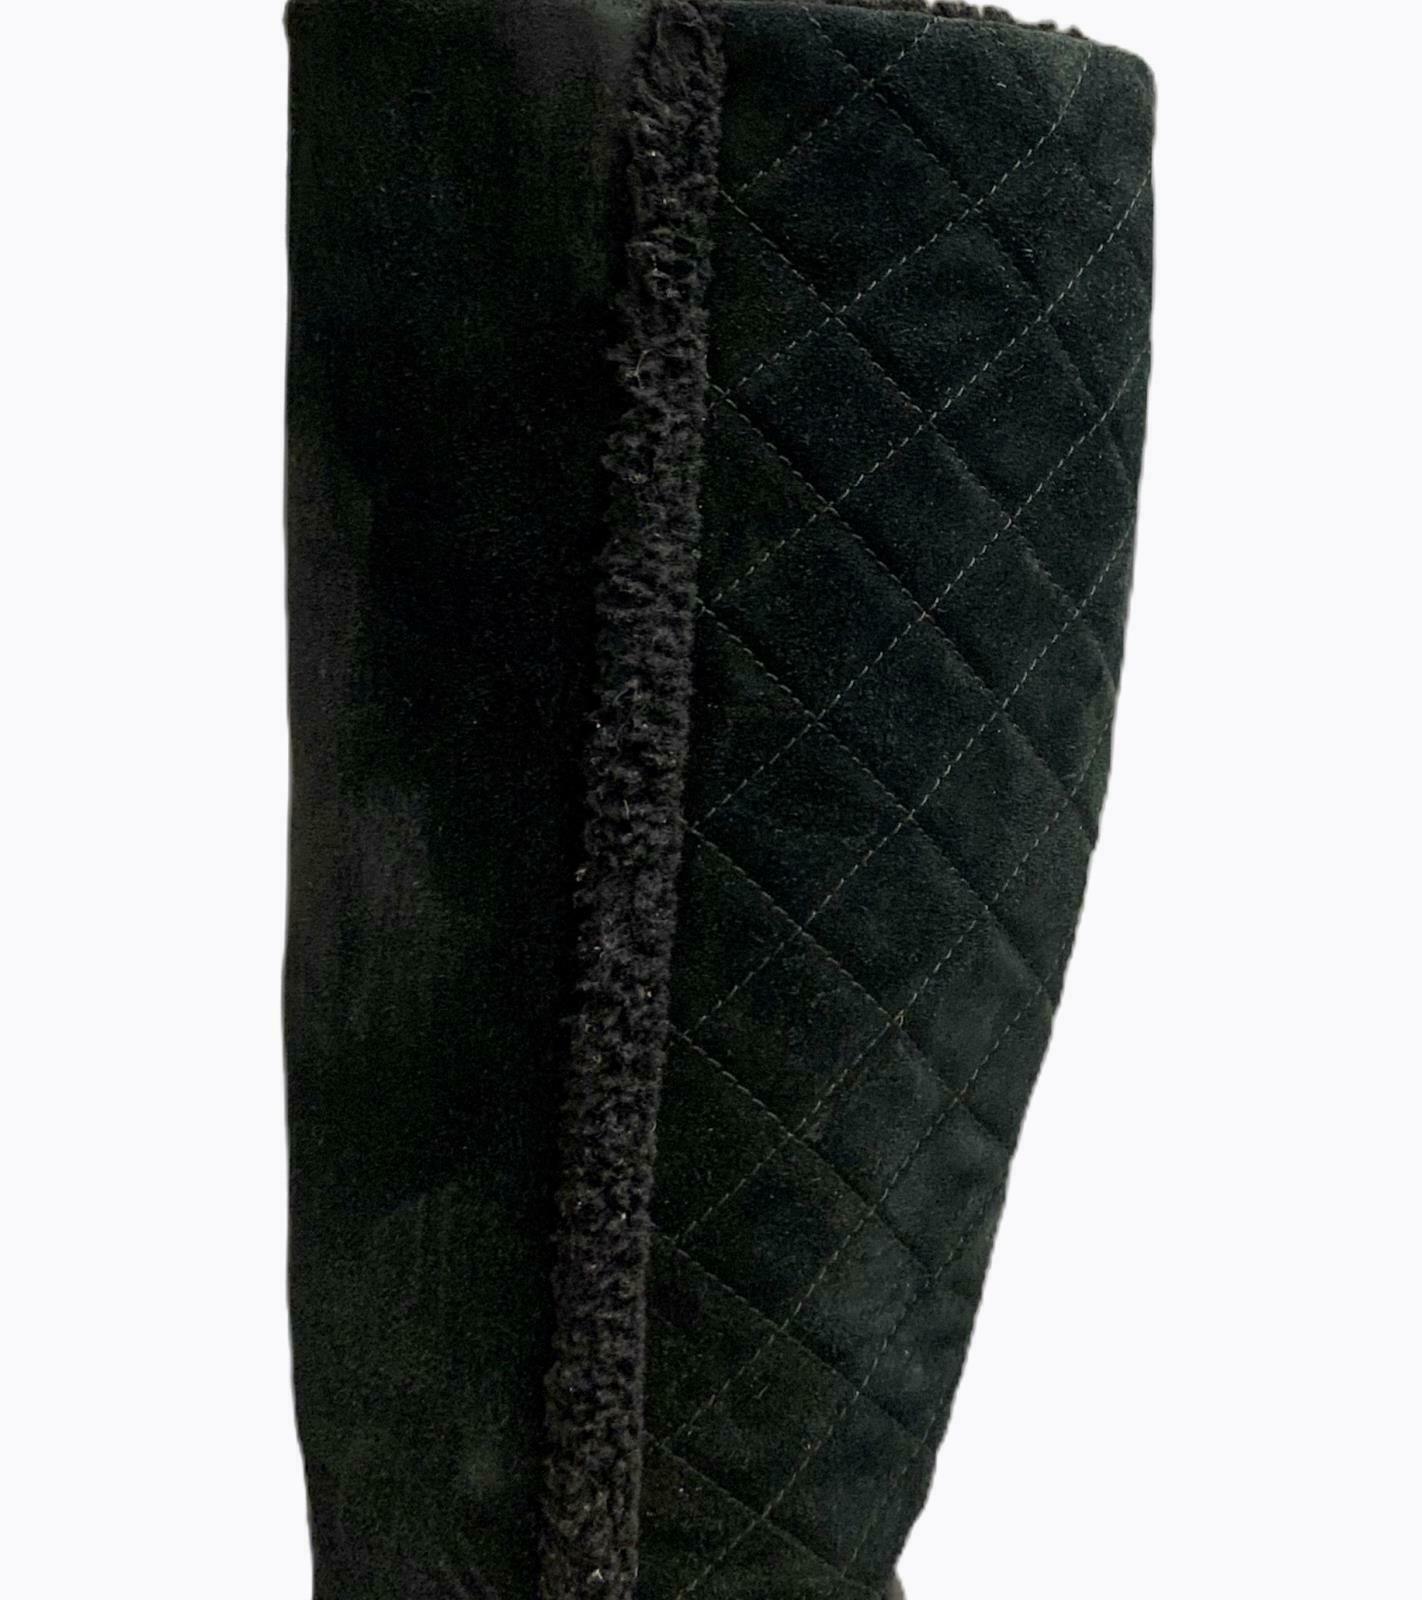 Aquatalia Women's Callie Black Suede Quilted Weatherproof Wedge Boot Size 9 - Premium Clothing, Shoes & Accessories:Women:Women's Shoes:Boots from Aquatalia - Just $90.89! Shop now at Finds For You